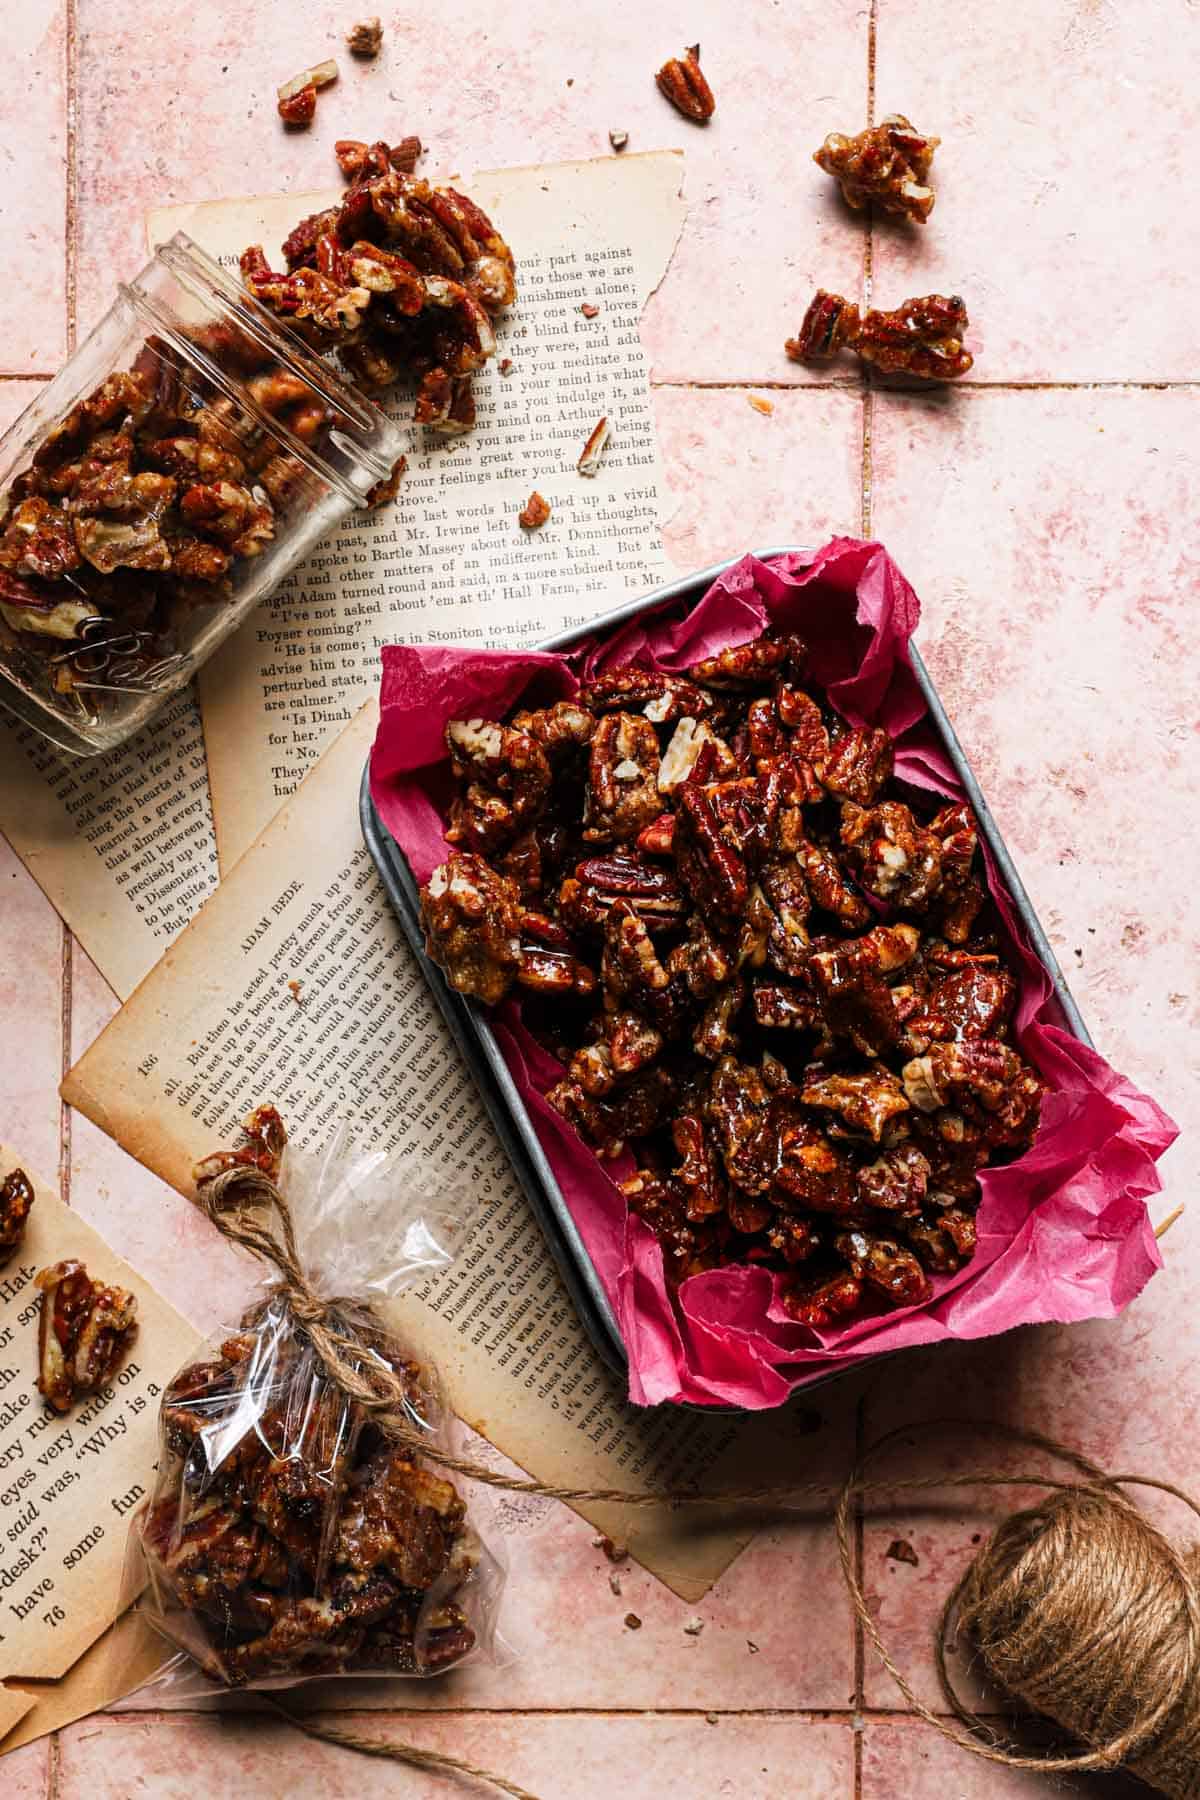 Three fun and creative ways to gift candied pecans. In a mason jar, a tin container and a plastic bag.